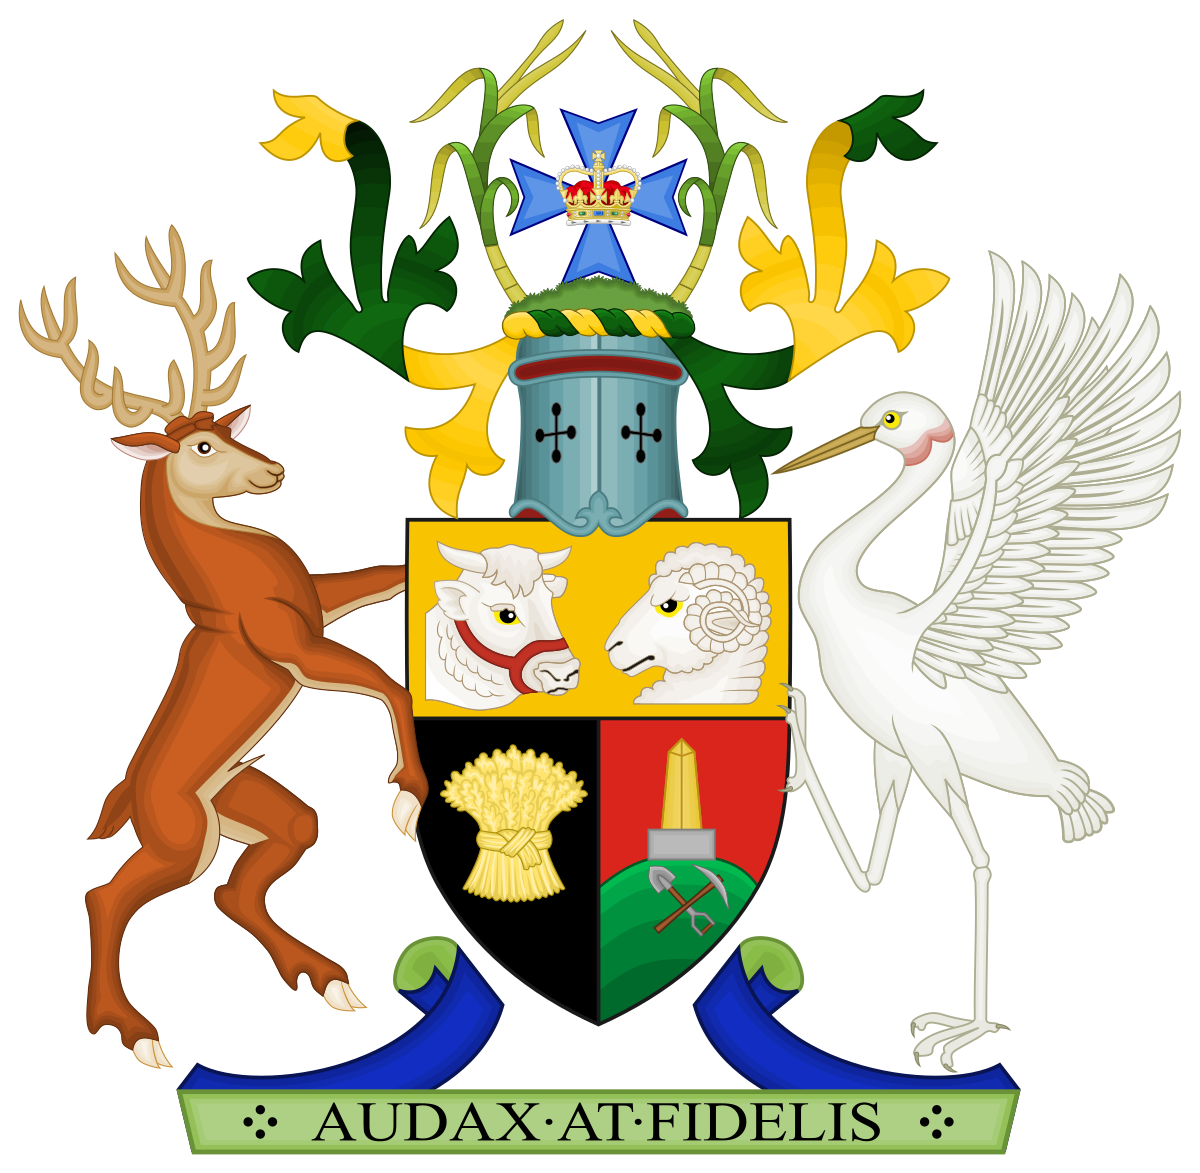 ck2 agot coat of arms are switched around